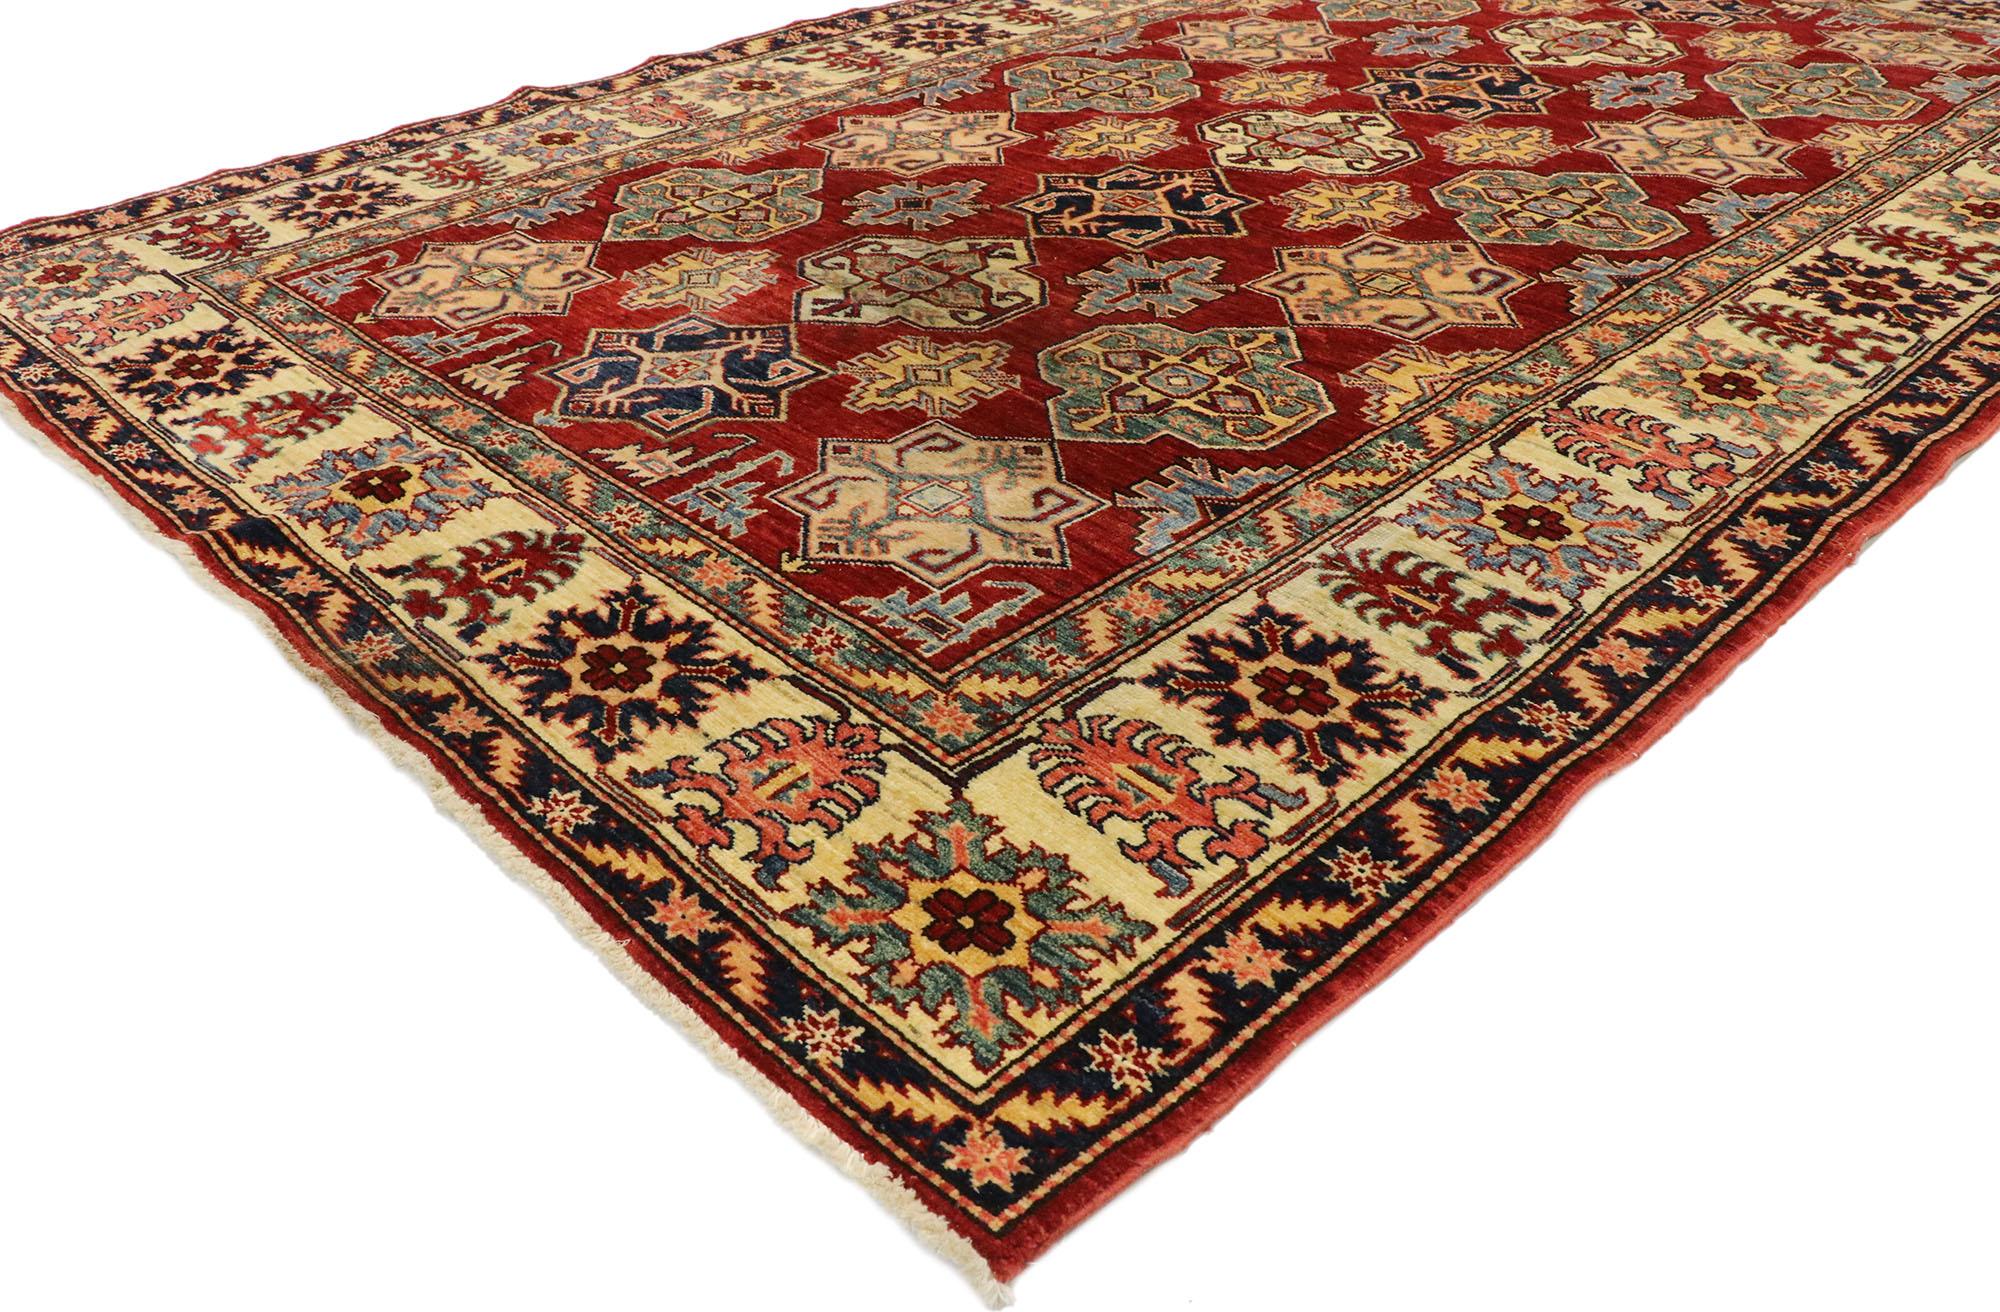 77532, vintage Pakistani rug with modern American Colonial style. Displaying well-balanced symmetry with a modern design aesthetic, this hand knotted wool vintage Pakistani rug beautifully embodies American Colonial style with tribal vibes. The